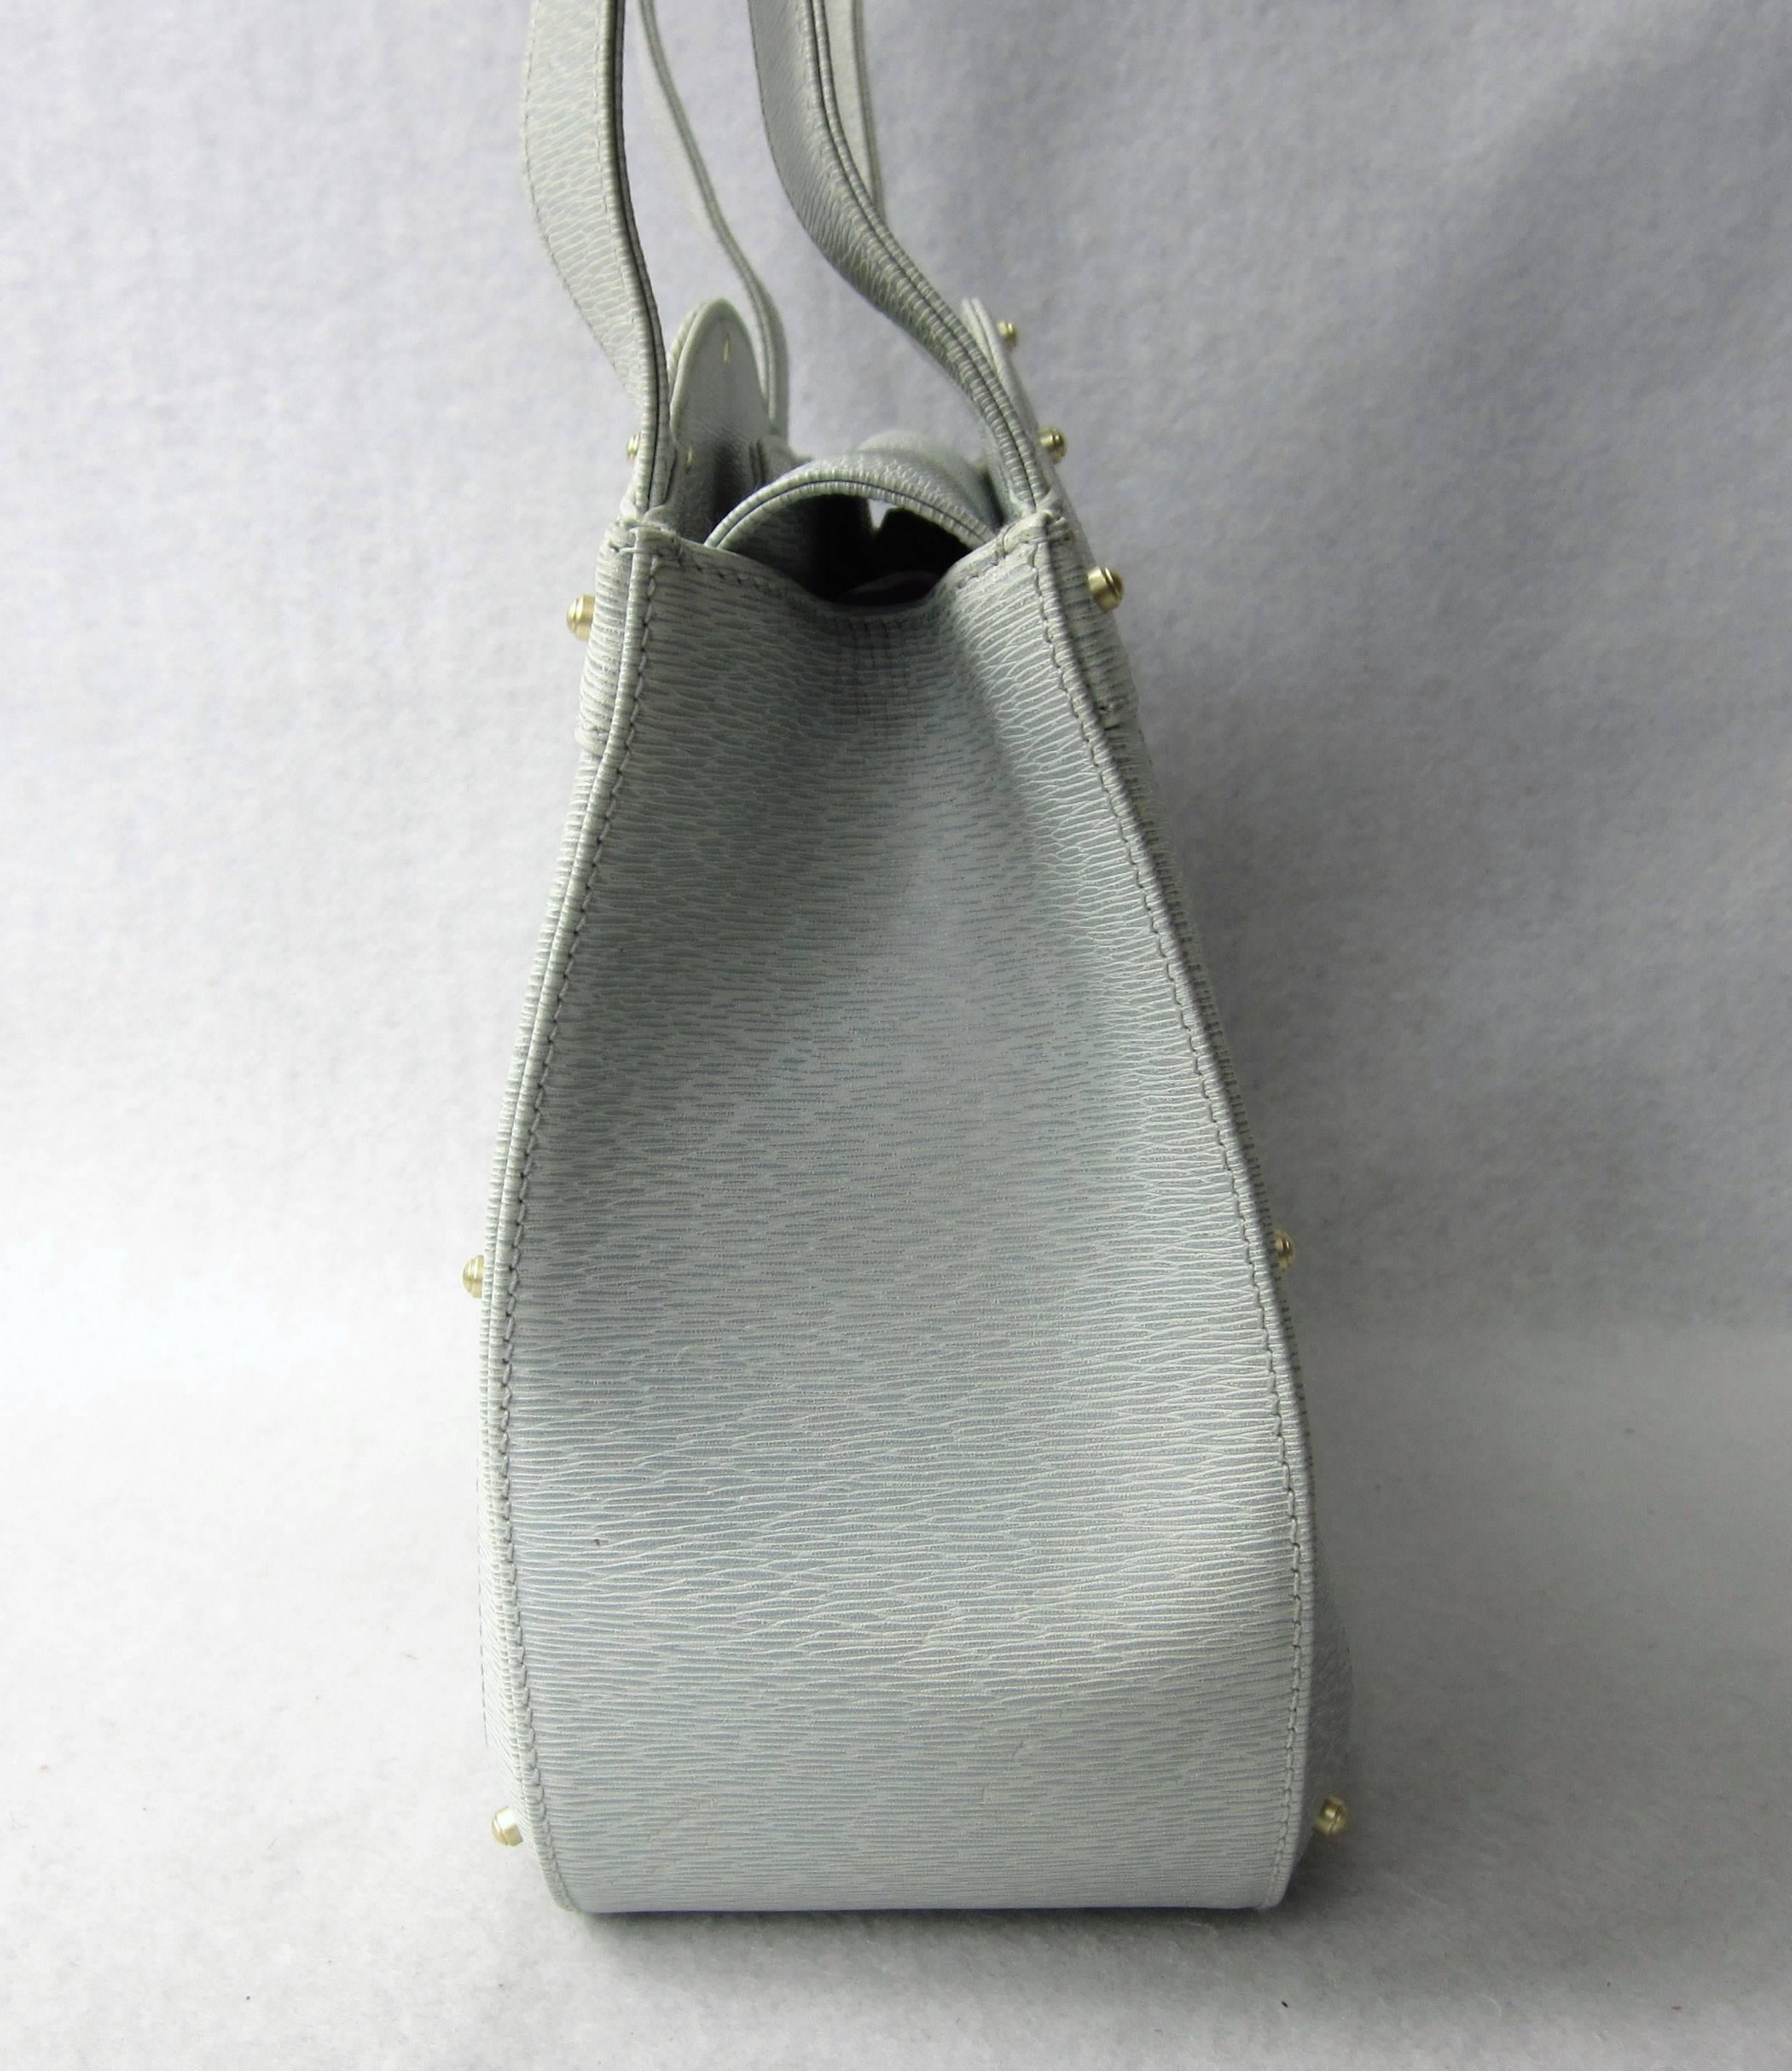 Gorgeous EARLY BARRY KIESELSTEIN CORD Handbag   SMALL KELLY HANDBAG TOTE AND ORIGINAL DUSTER BAG.  Great greenish grey   Hard to Find a New Old Stock Kieselstein, Collectable and unique.  Double Strap with Matte Brass Hardware.  MATTE Gold GATOR